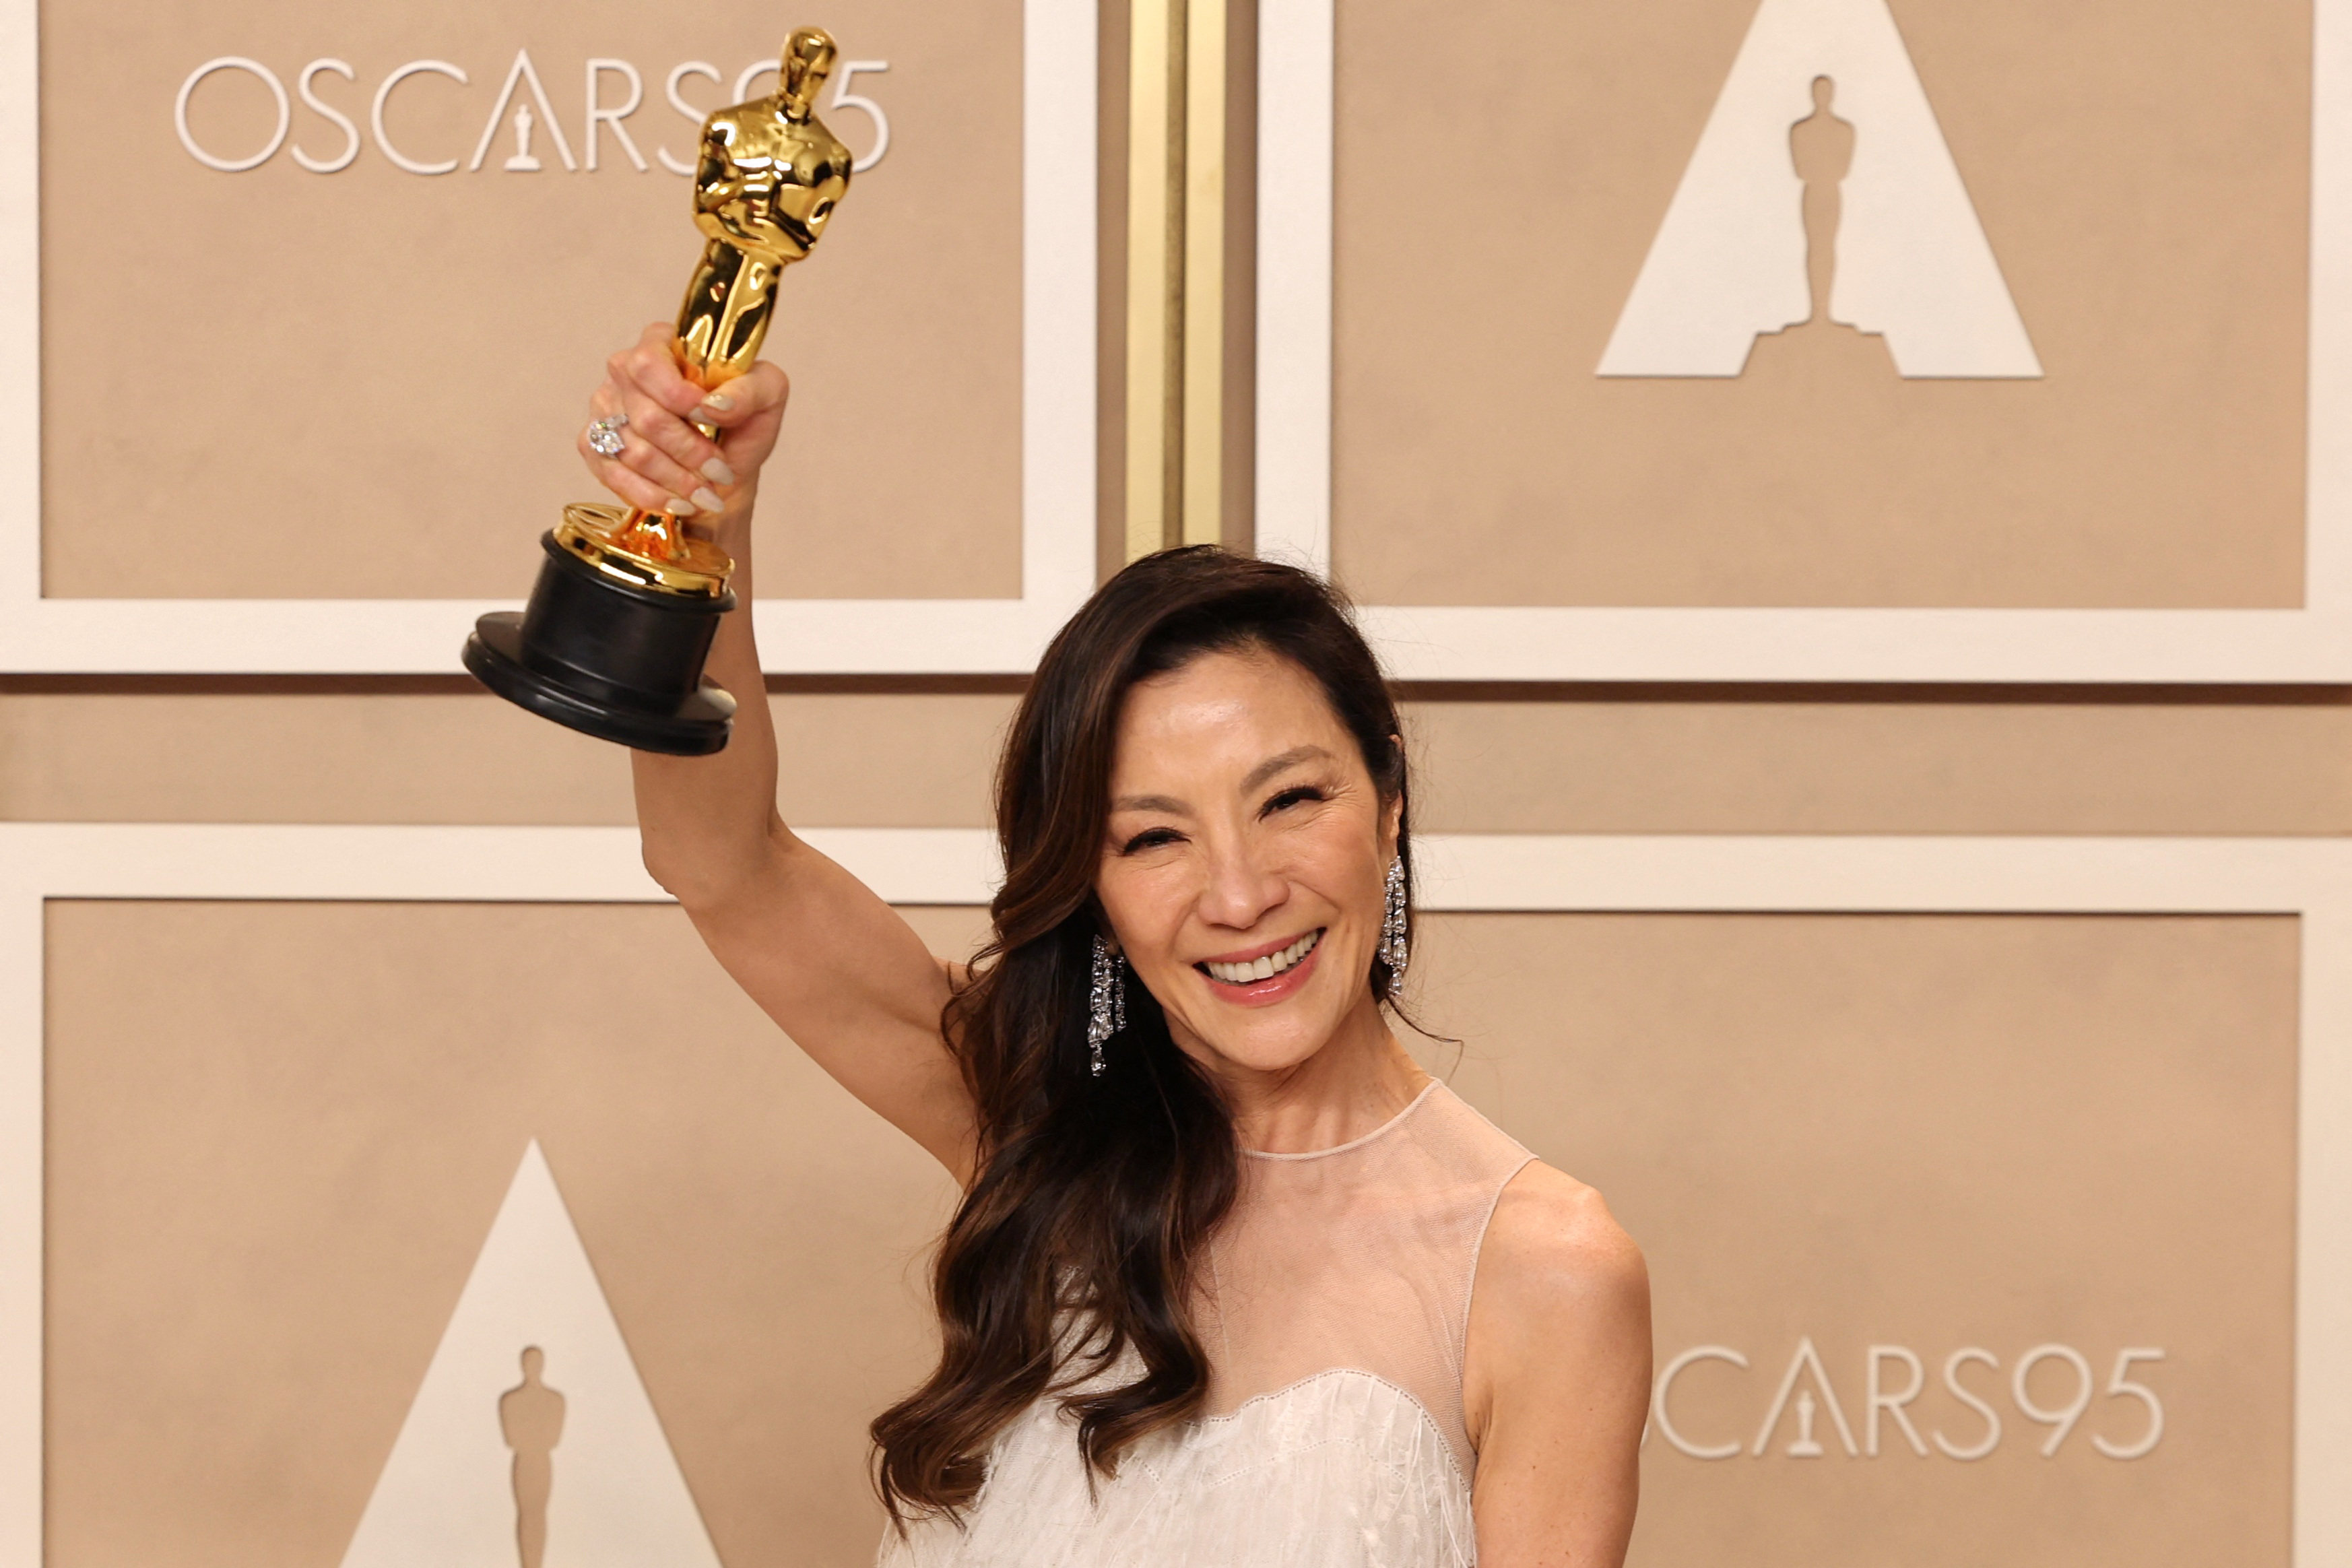 Michelle Yeoh poses with her Oscar for Best Actress at the 95th Academy Awards in Hollywood, Los Angeles, on March 12. Yeoh became the first Asian woman and second woman of colour to win the award. Photo: Reuters